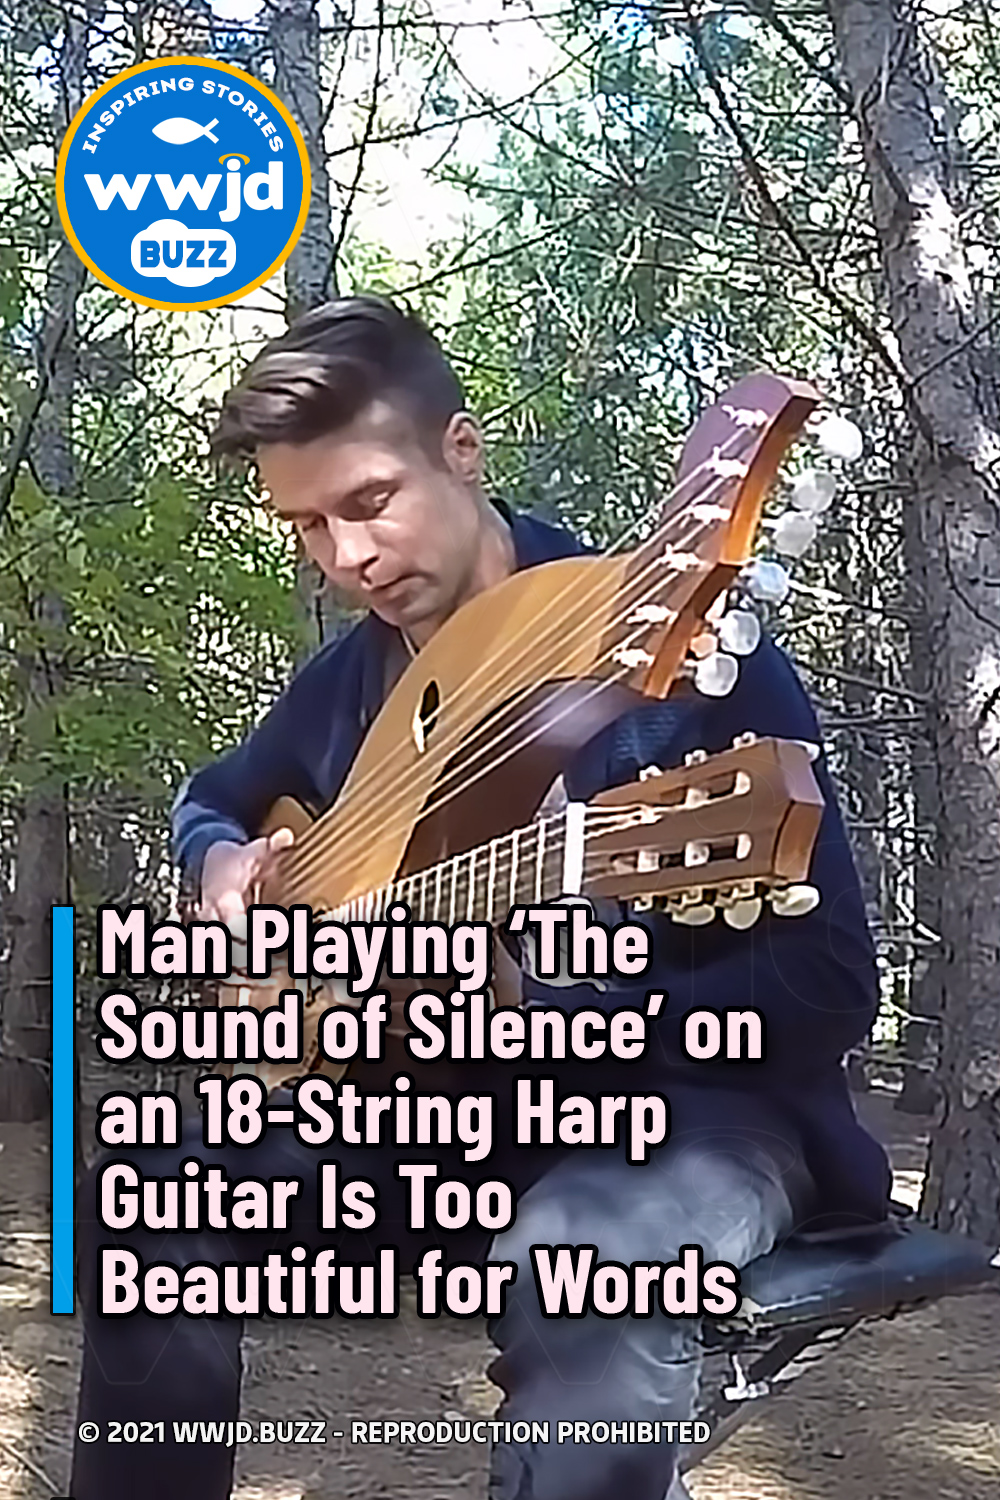 Man Playing ‘The Sound of Silence\' on an 18-String Harp Guitar Is Too Beautiful for Words